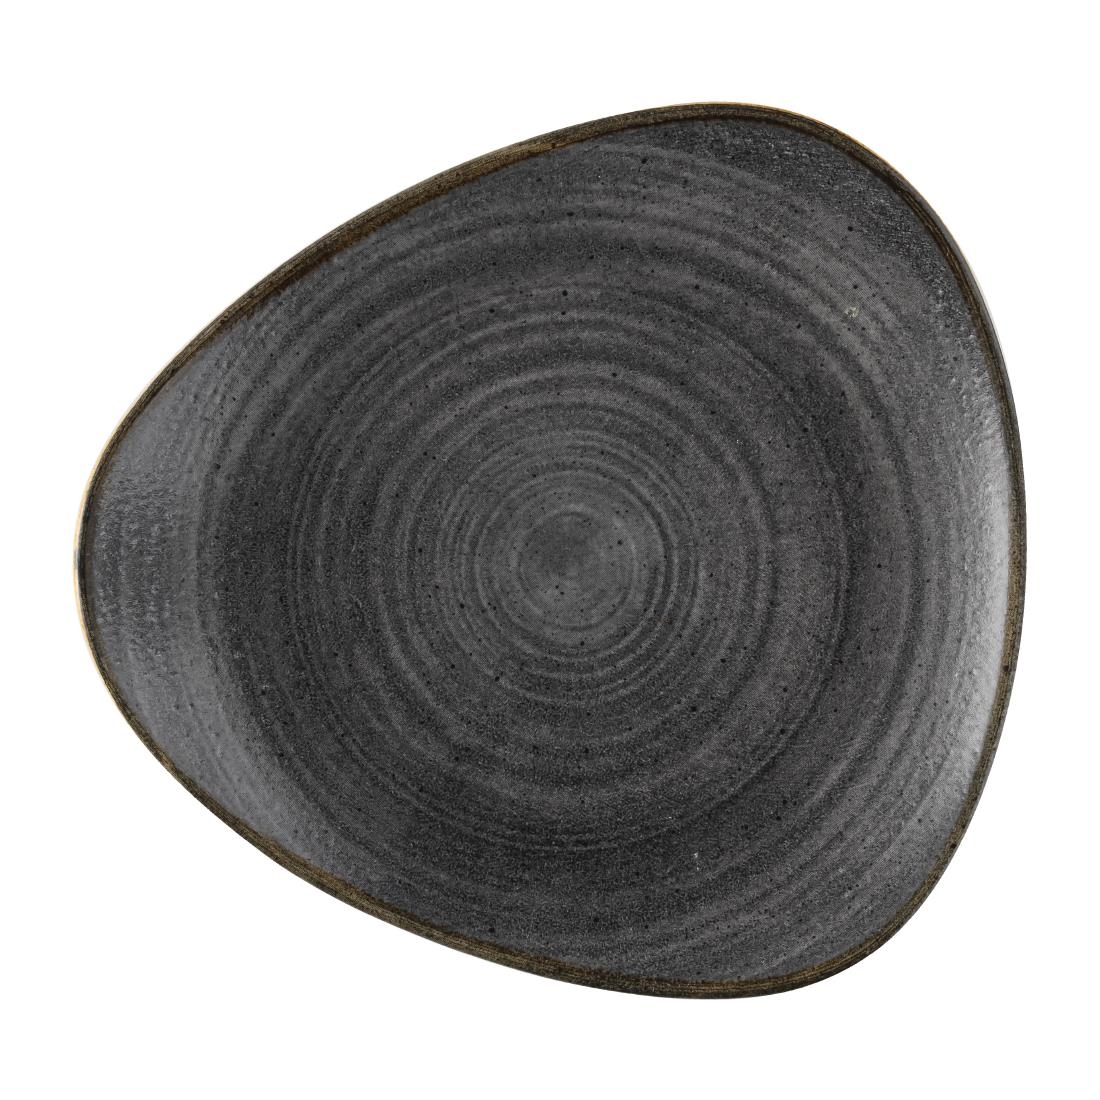 Churchill Stonecast Raw Lotus Plate Black 254mm (Pack of 12)